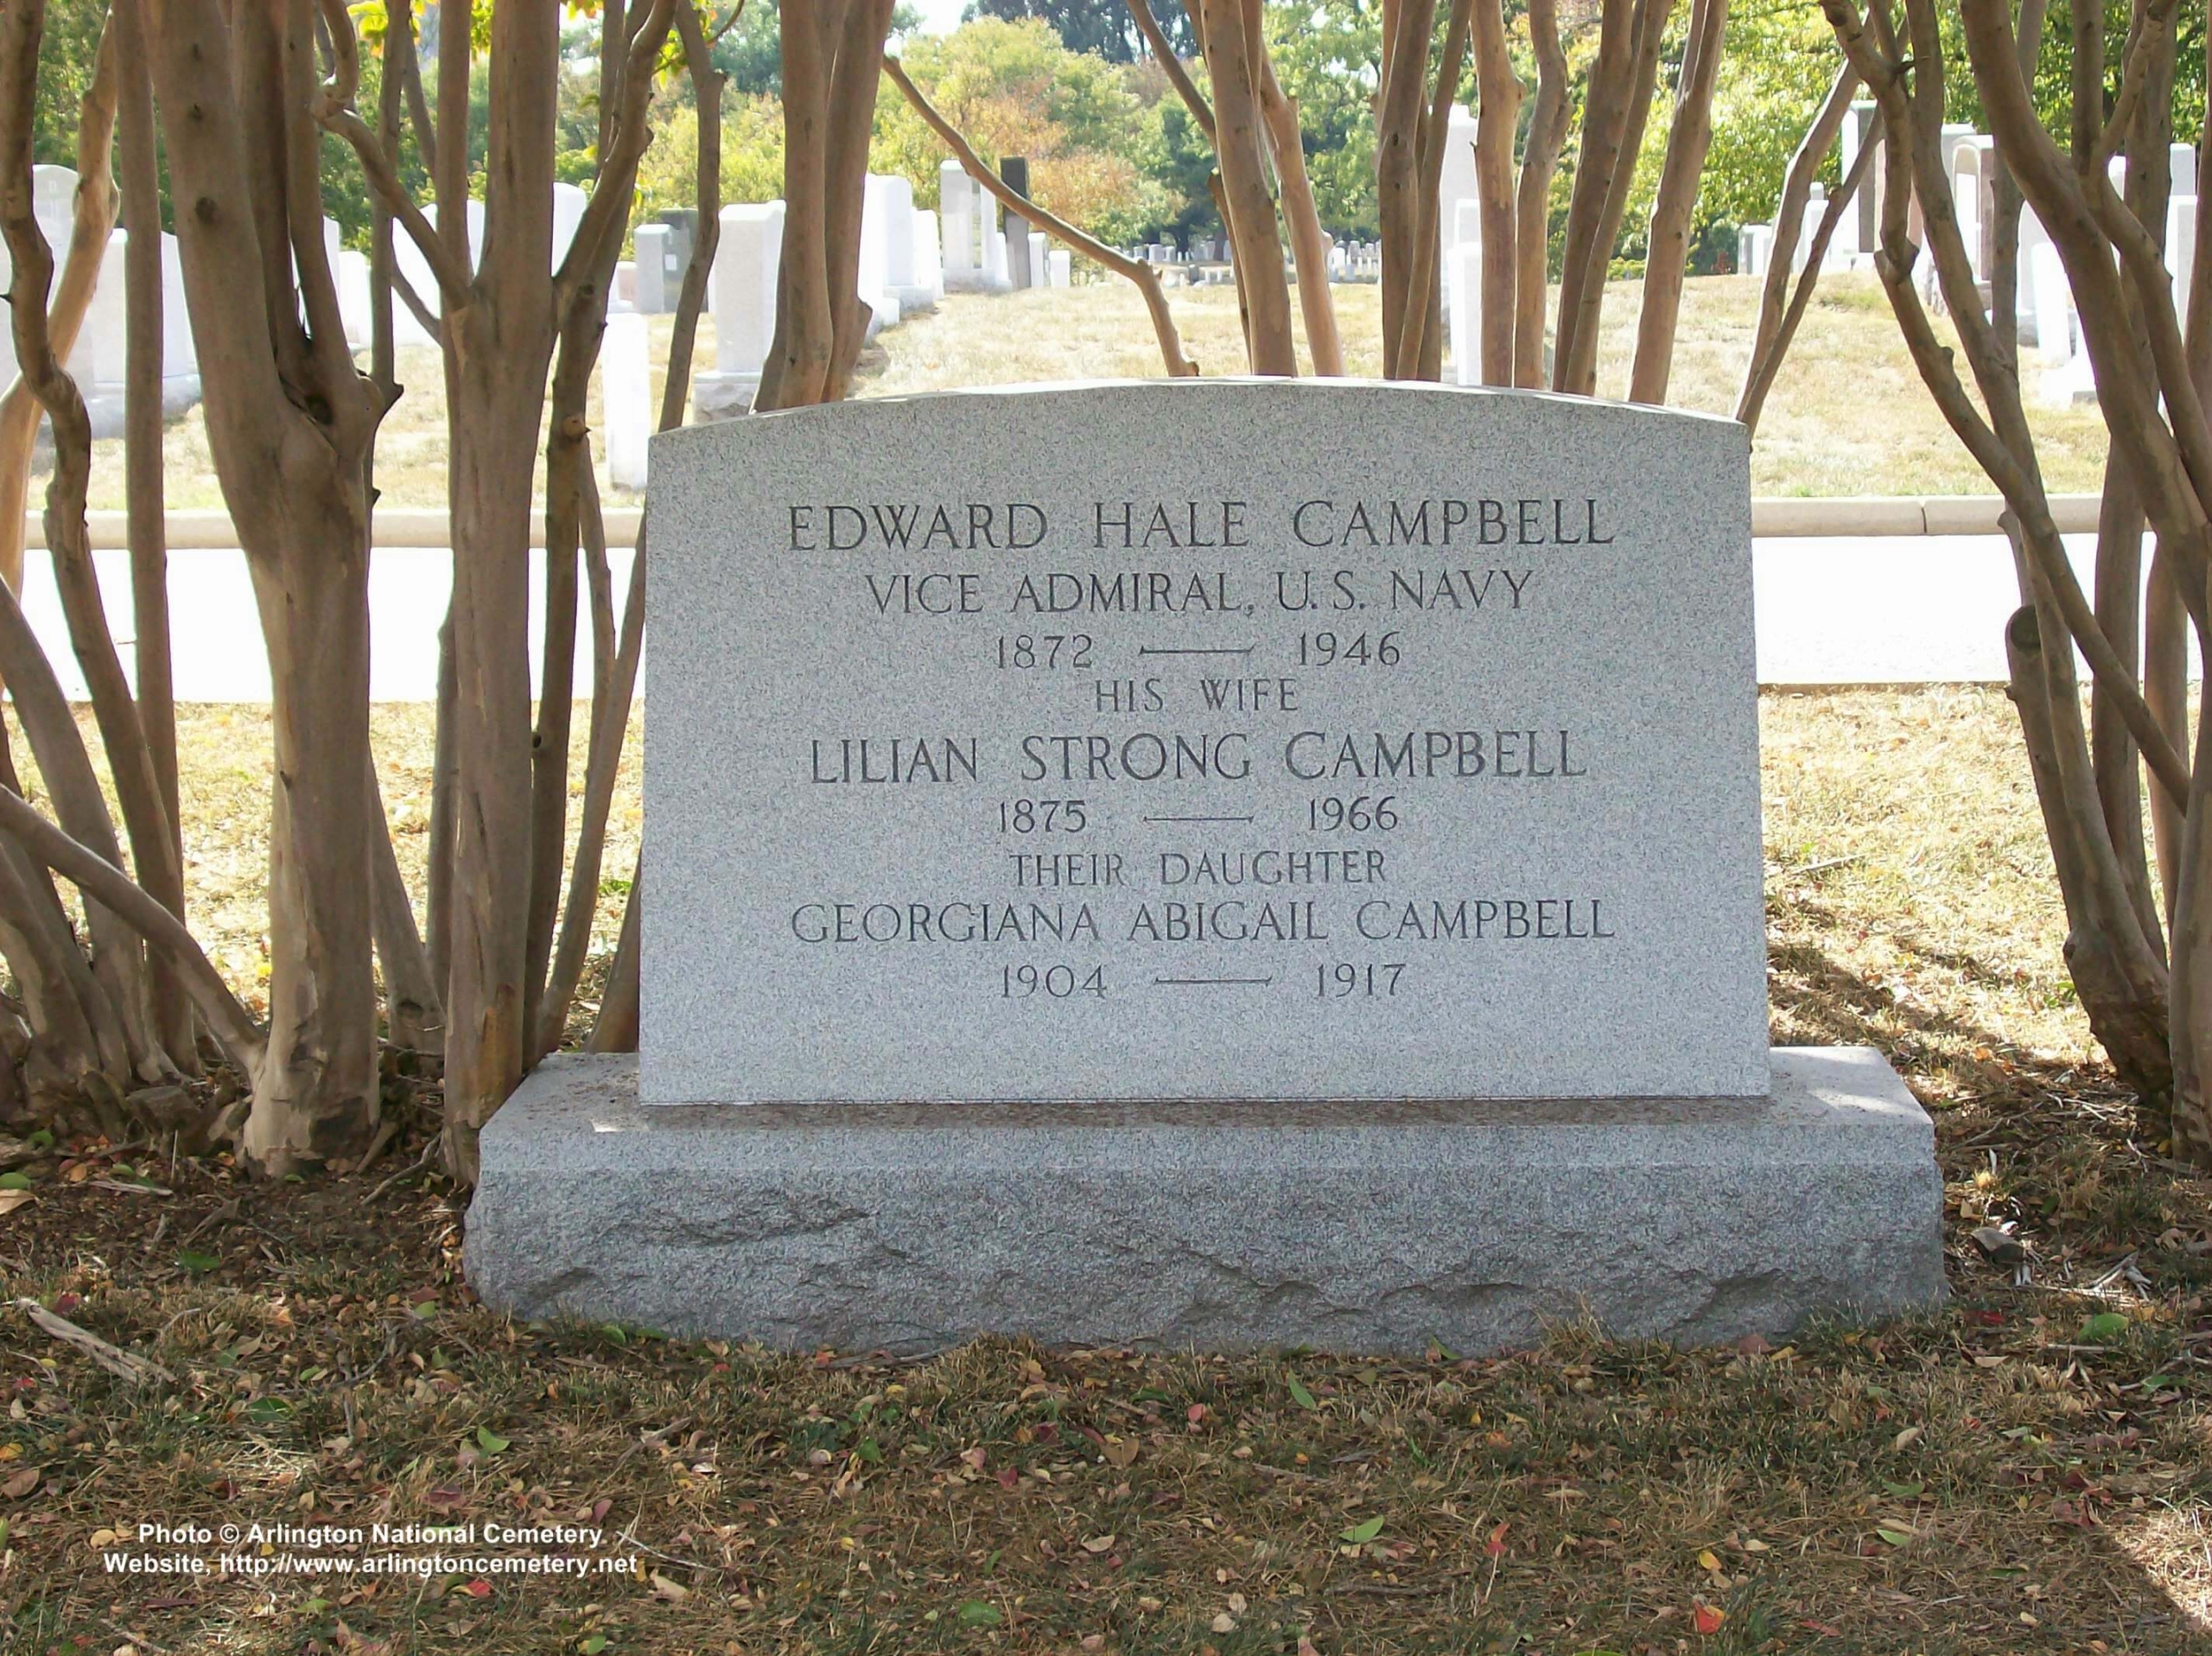 ehcampbell-gravesite-photo-october-2007-001